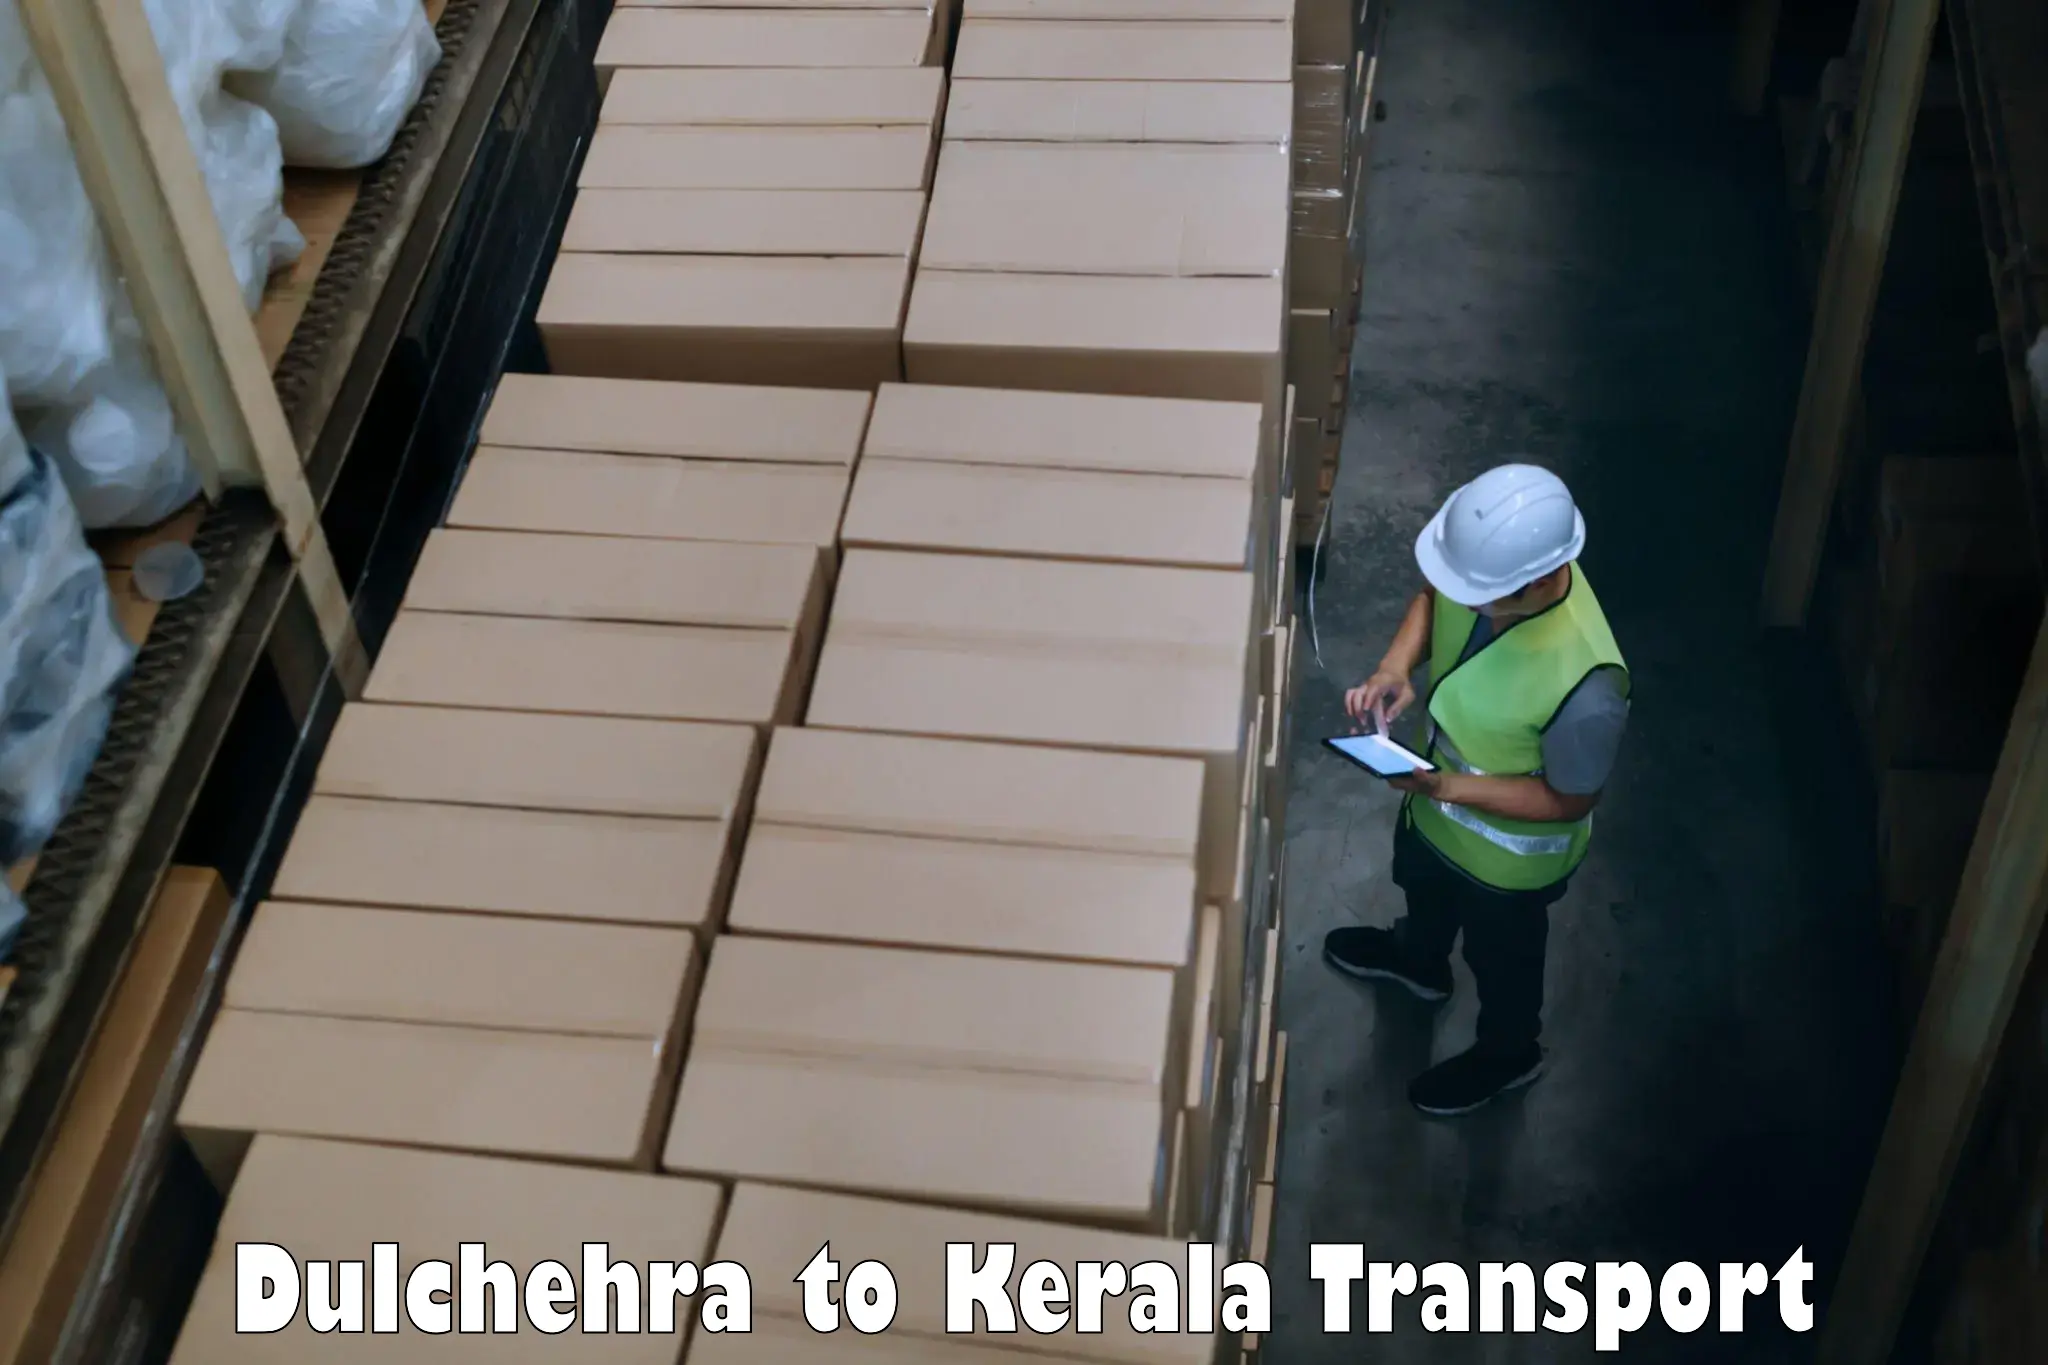 Shipping services Dulchehra to Rajamudy